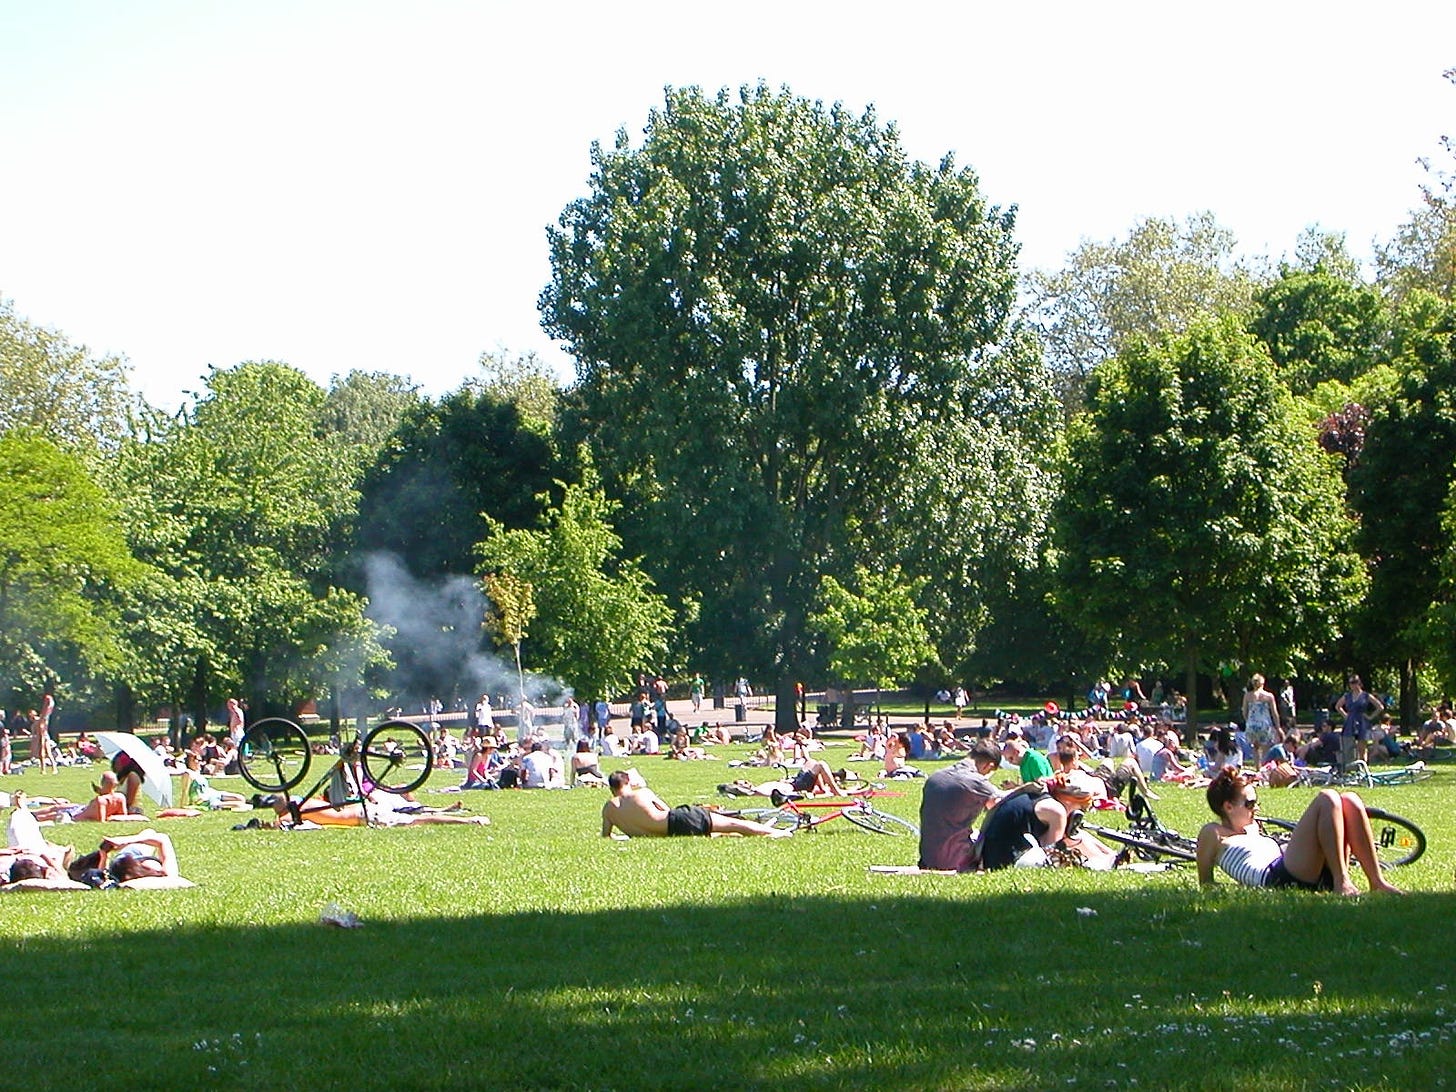 Victoria Park in London, during a warm summer day, with the grass covered with people sunbathing, chatting, kicking a ball and even someone BBQing something.